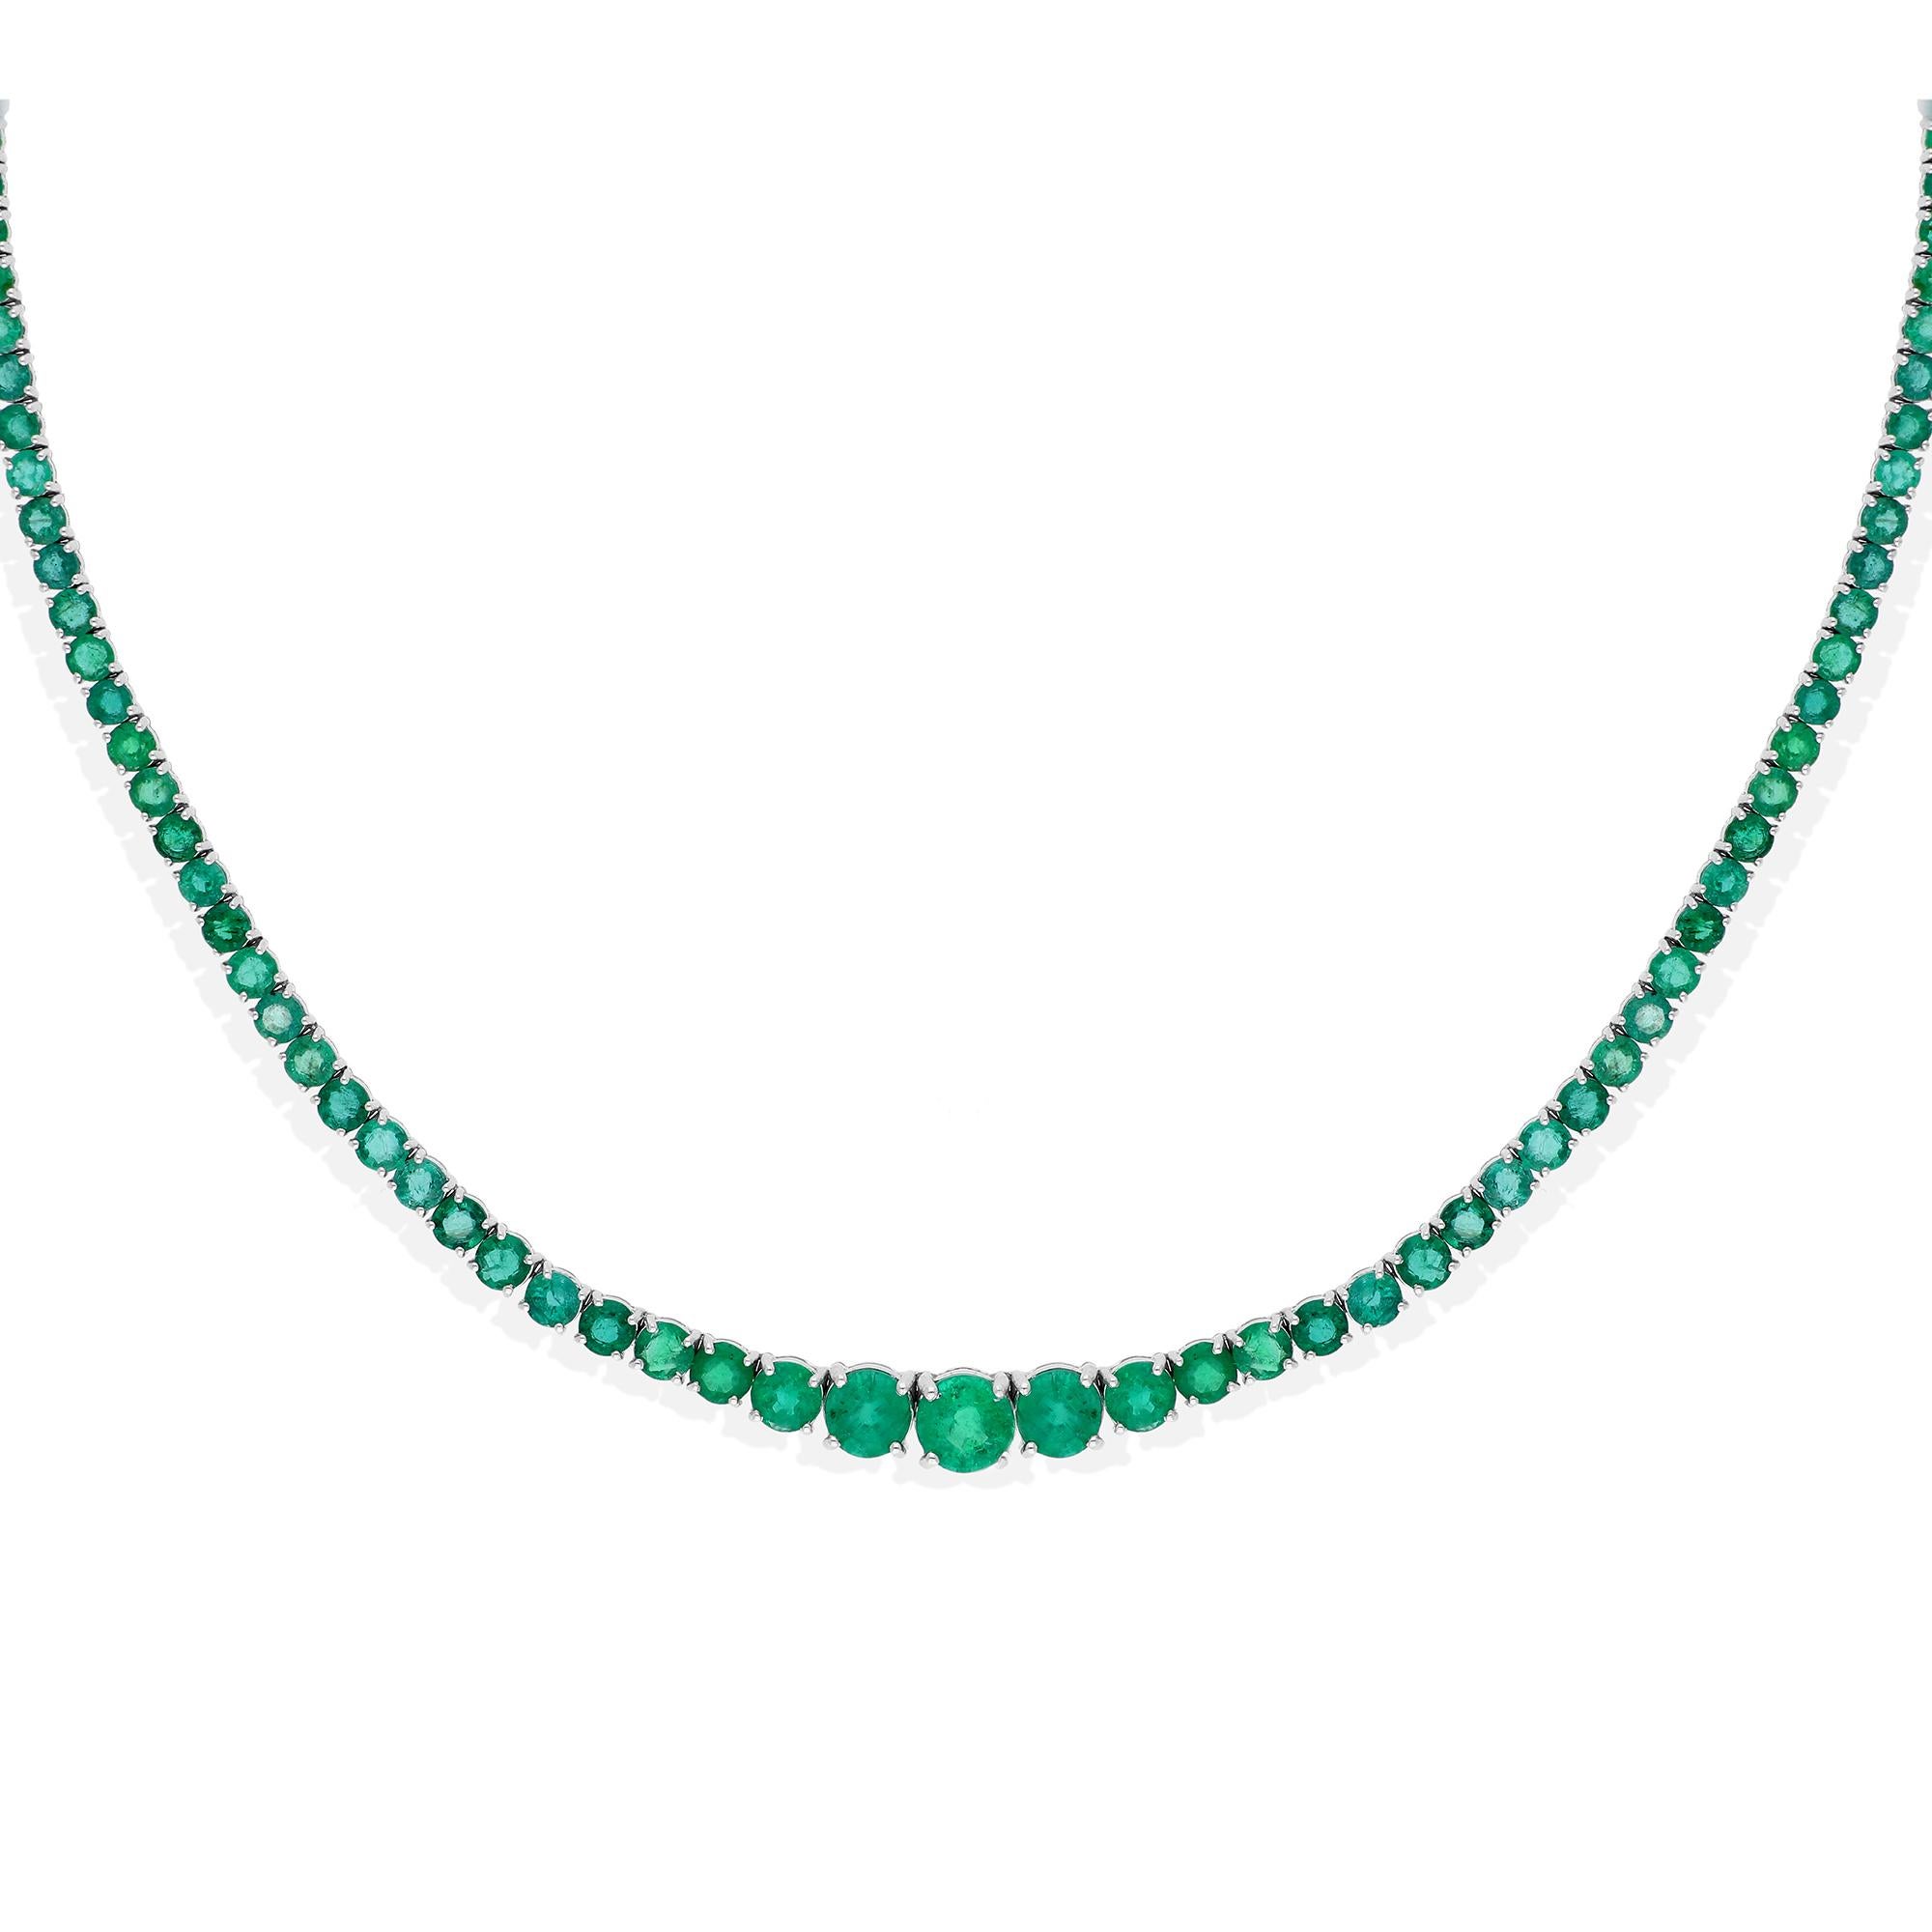 Each Zambian emerald, carefully selected for its exceptional quality and mesmerizing hue, is expertly graduated in size, creating a breathtaking cascade of green brilliance. The rich, verdant tones of the emeralds evoke a sense of natural beauty and